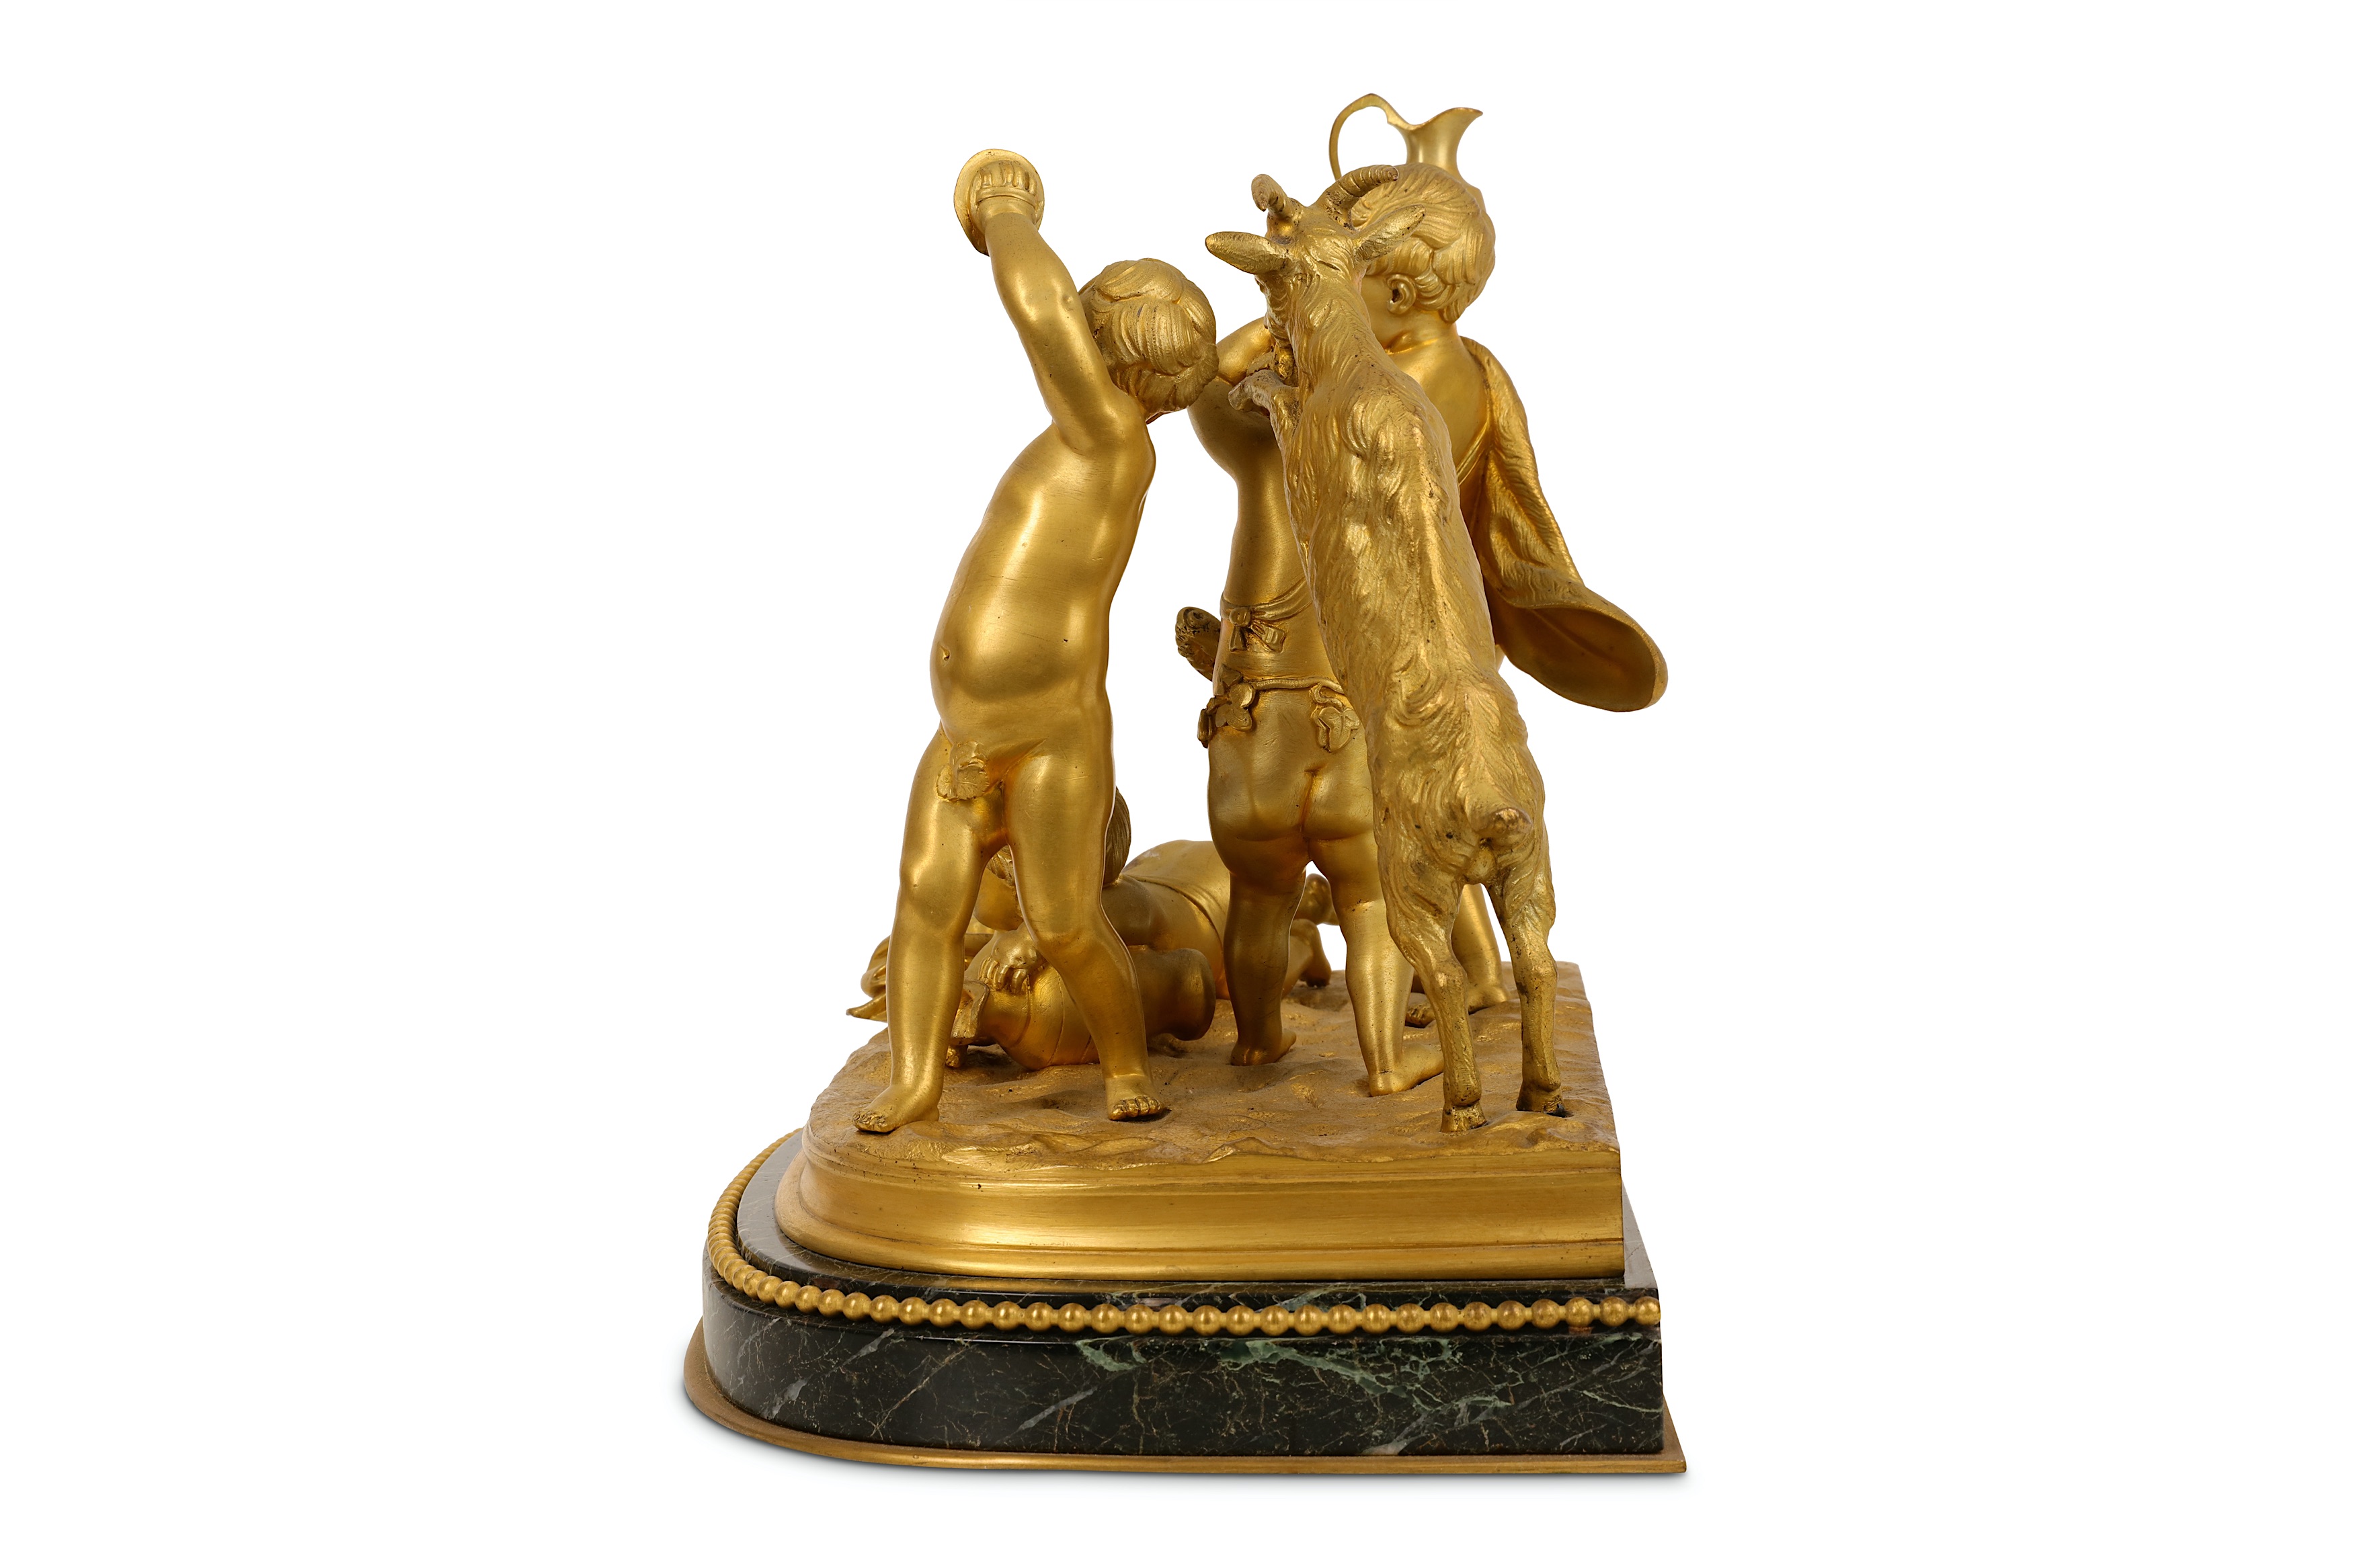 A FINE LATE 19TH CENTURY FRENCH GILT BRONZE FIGURAL GROUP OF PUTTI AND A GOAT SIGNED 'SEVRES' with - Image 2 of 5